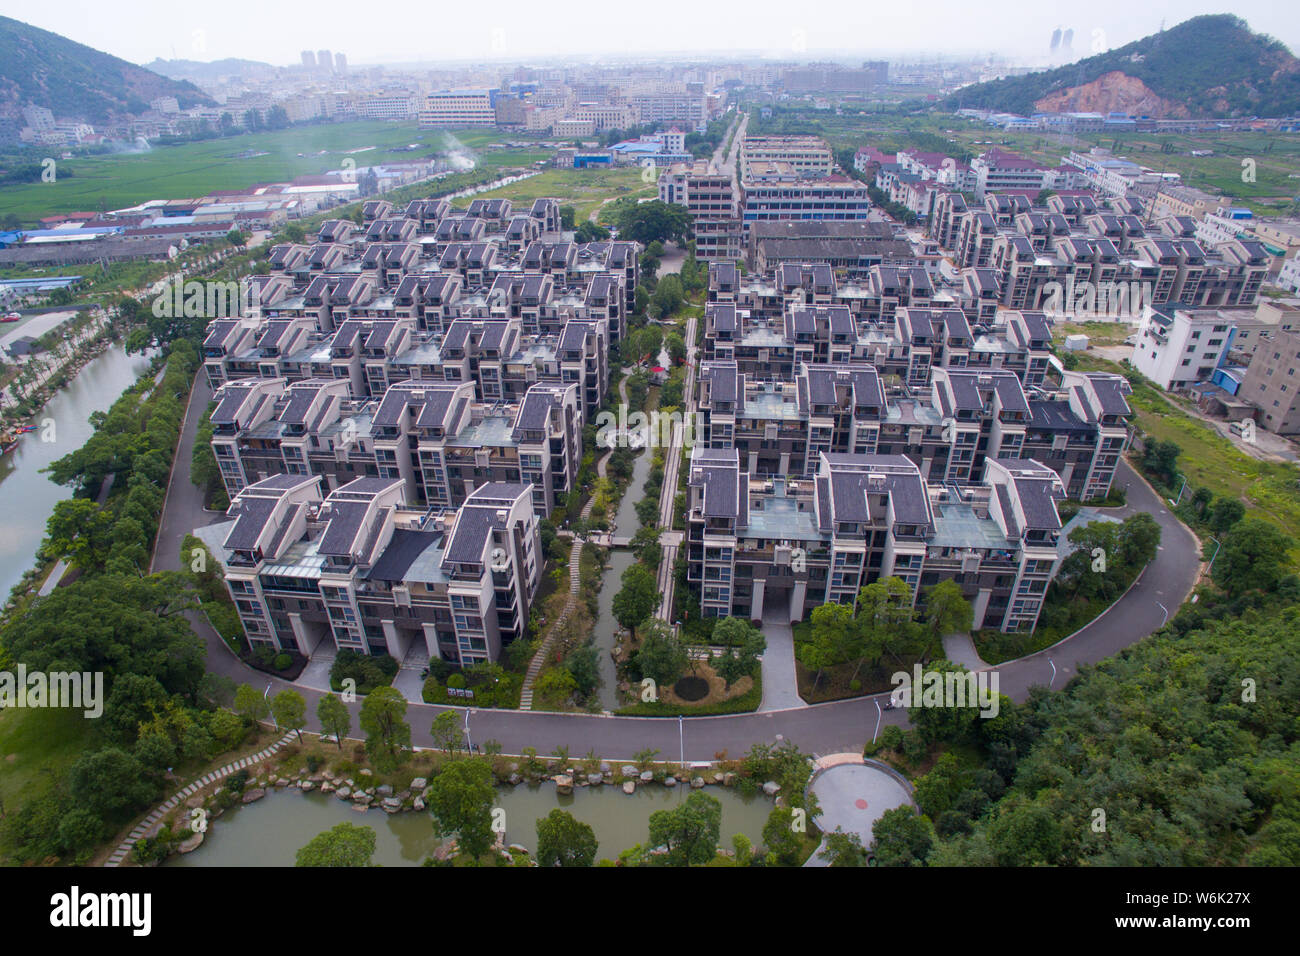 --FILE--Aerial view of villas for residents at a village in Rui'an county of Wenzhou city, east China's Zhejiang province, 26 August 2015.   The Chine Stock Photo